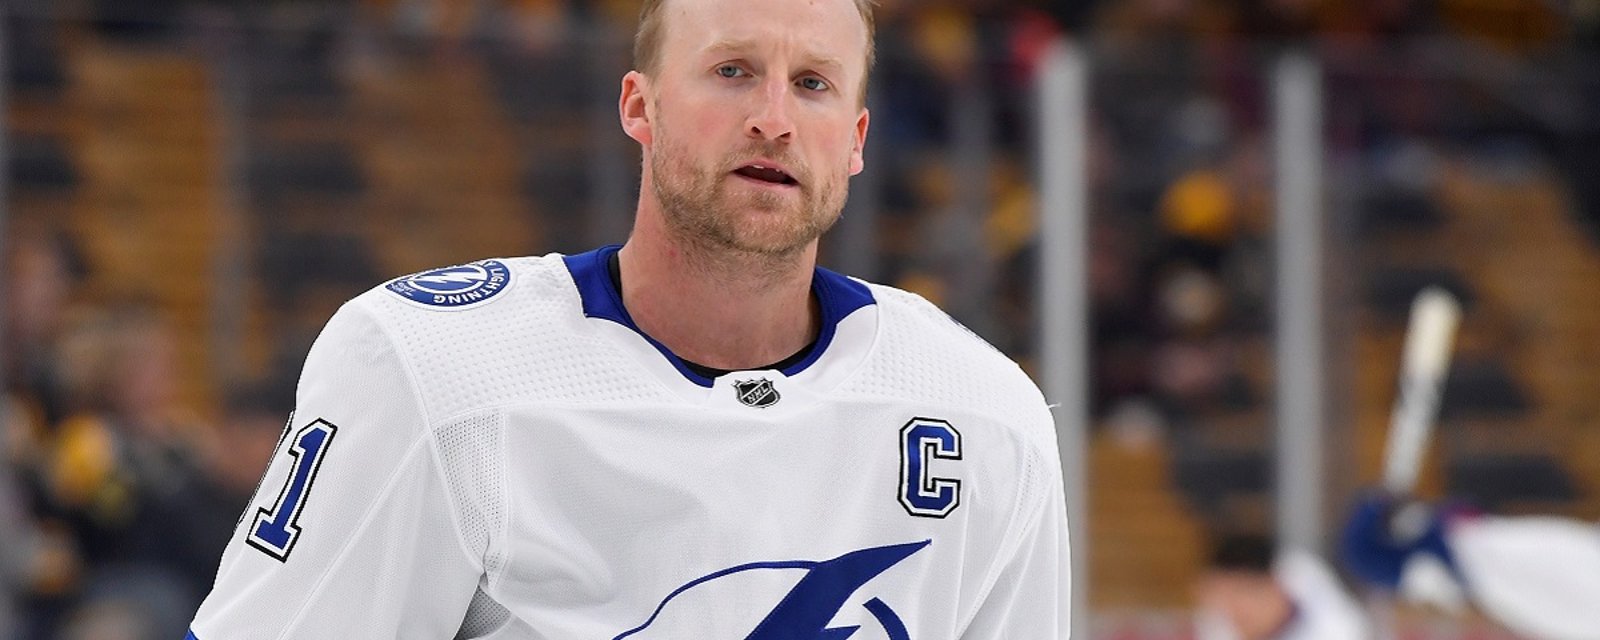 Rumor: Steven Stamkos “will play” in the 2020 Stanley Cup playoffs.